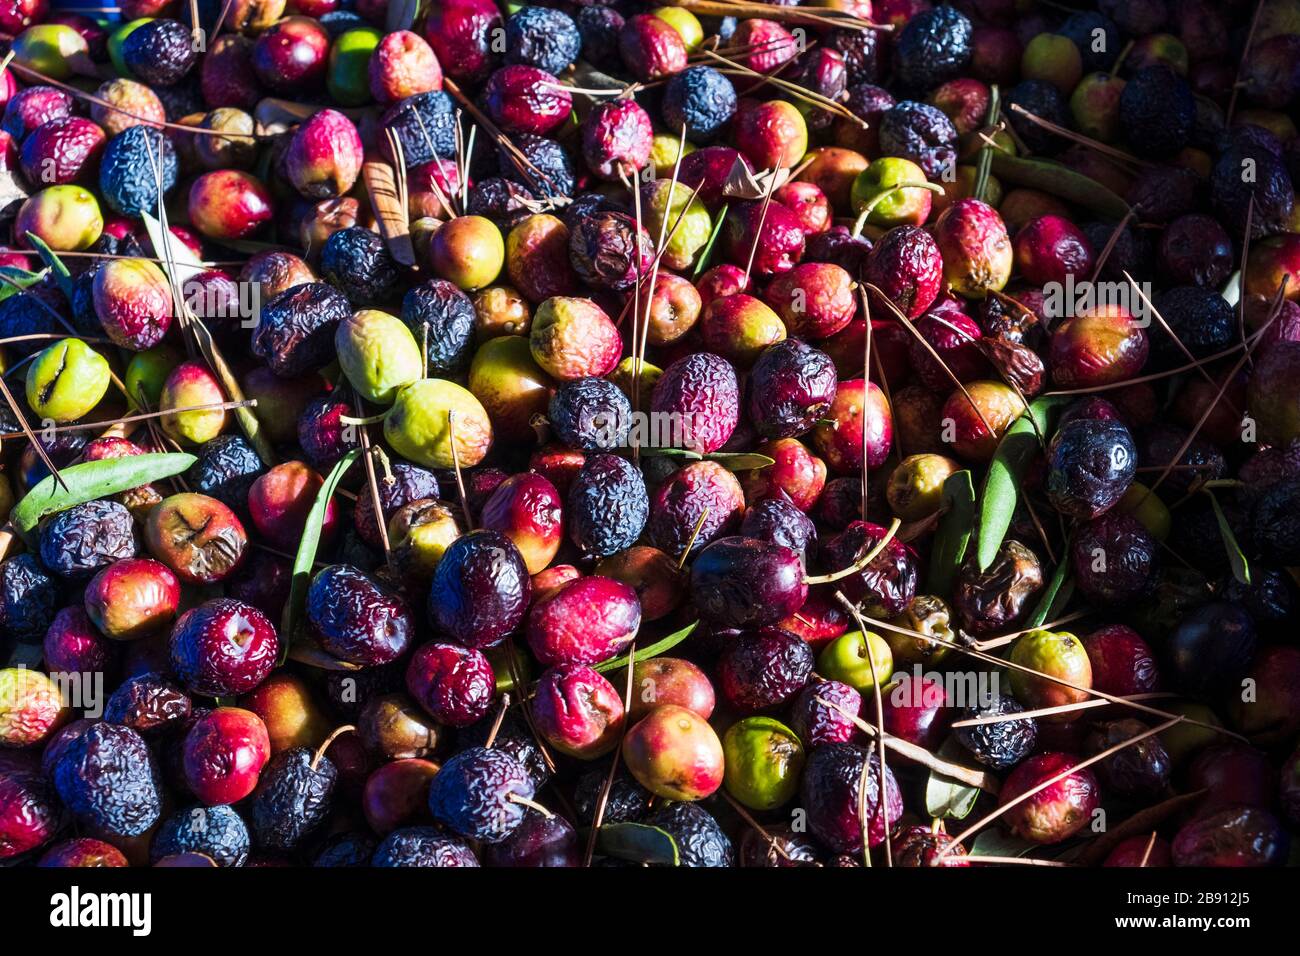 Olives waiting to be pressed at the tradiitional Olive Oil Extraction Press, Quatretonda Stock Photo